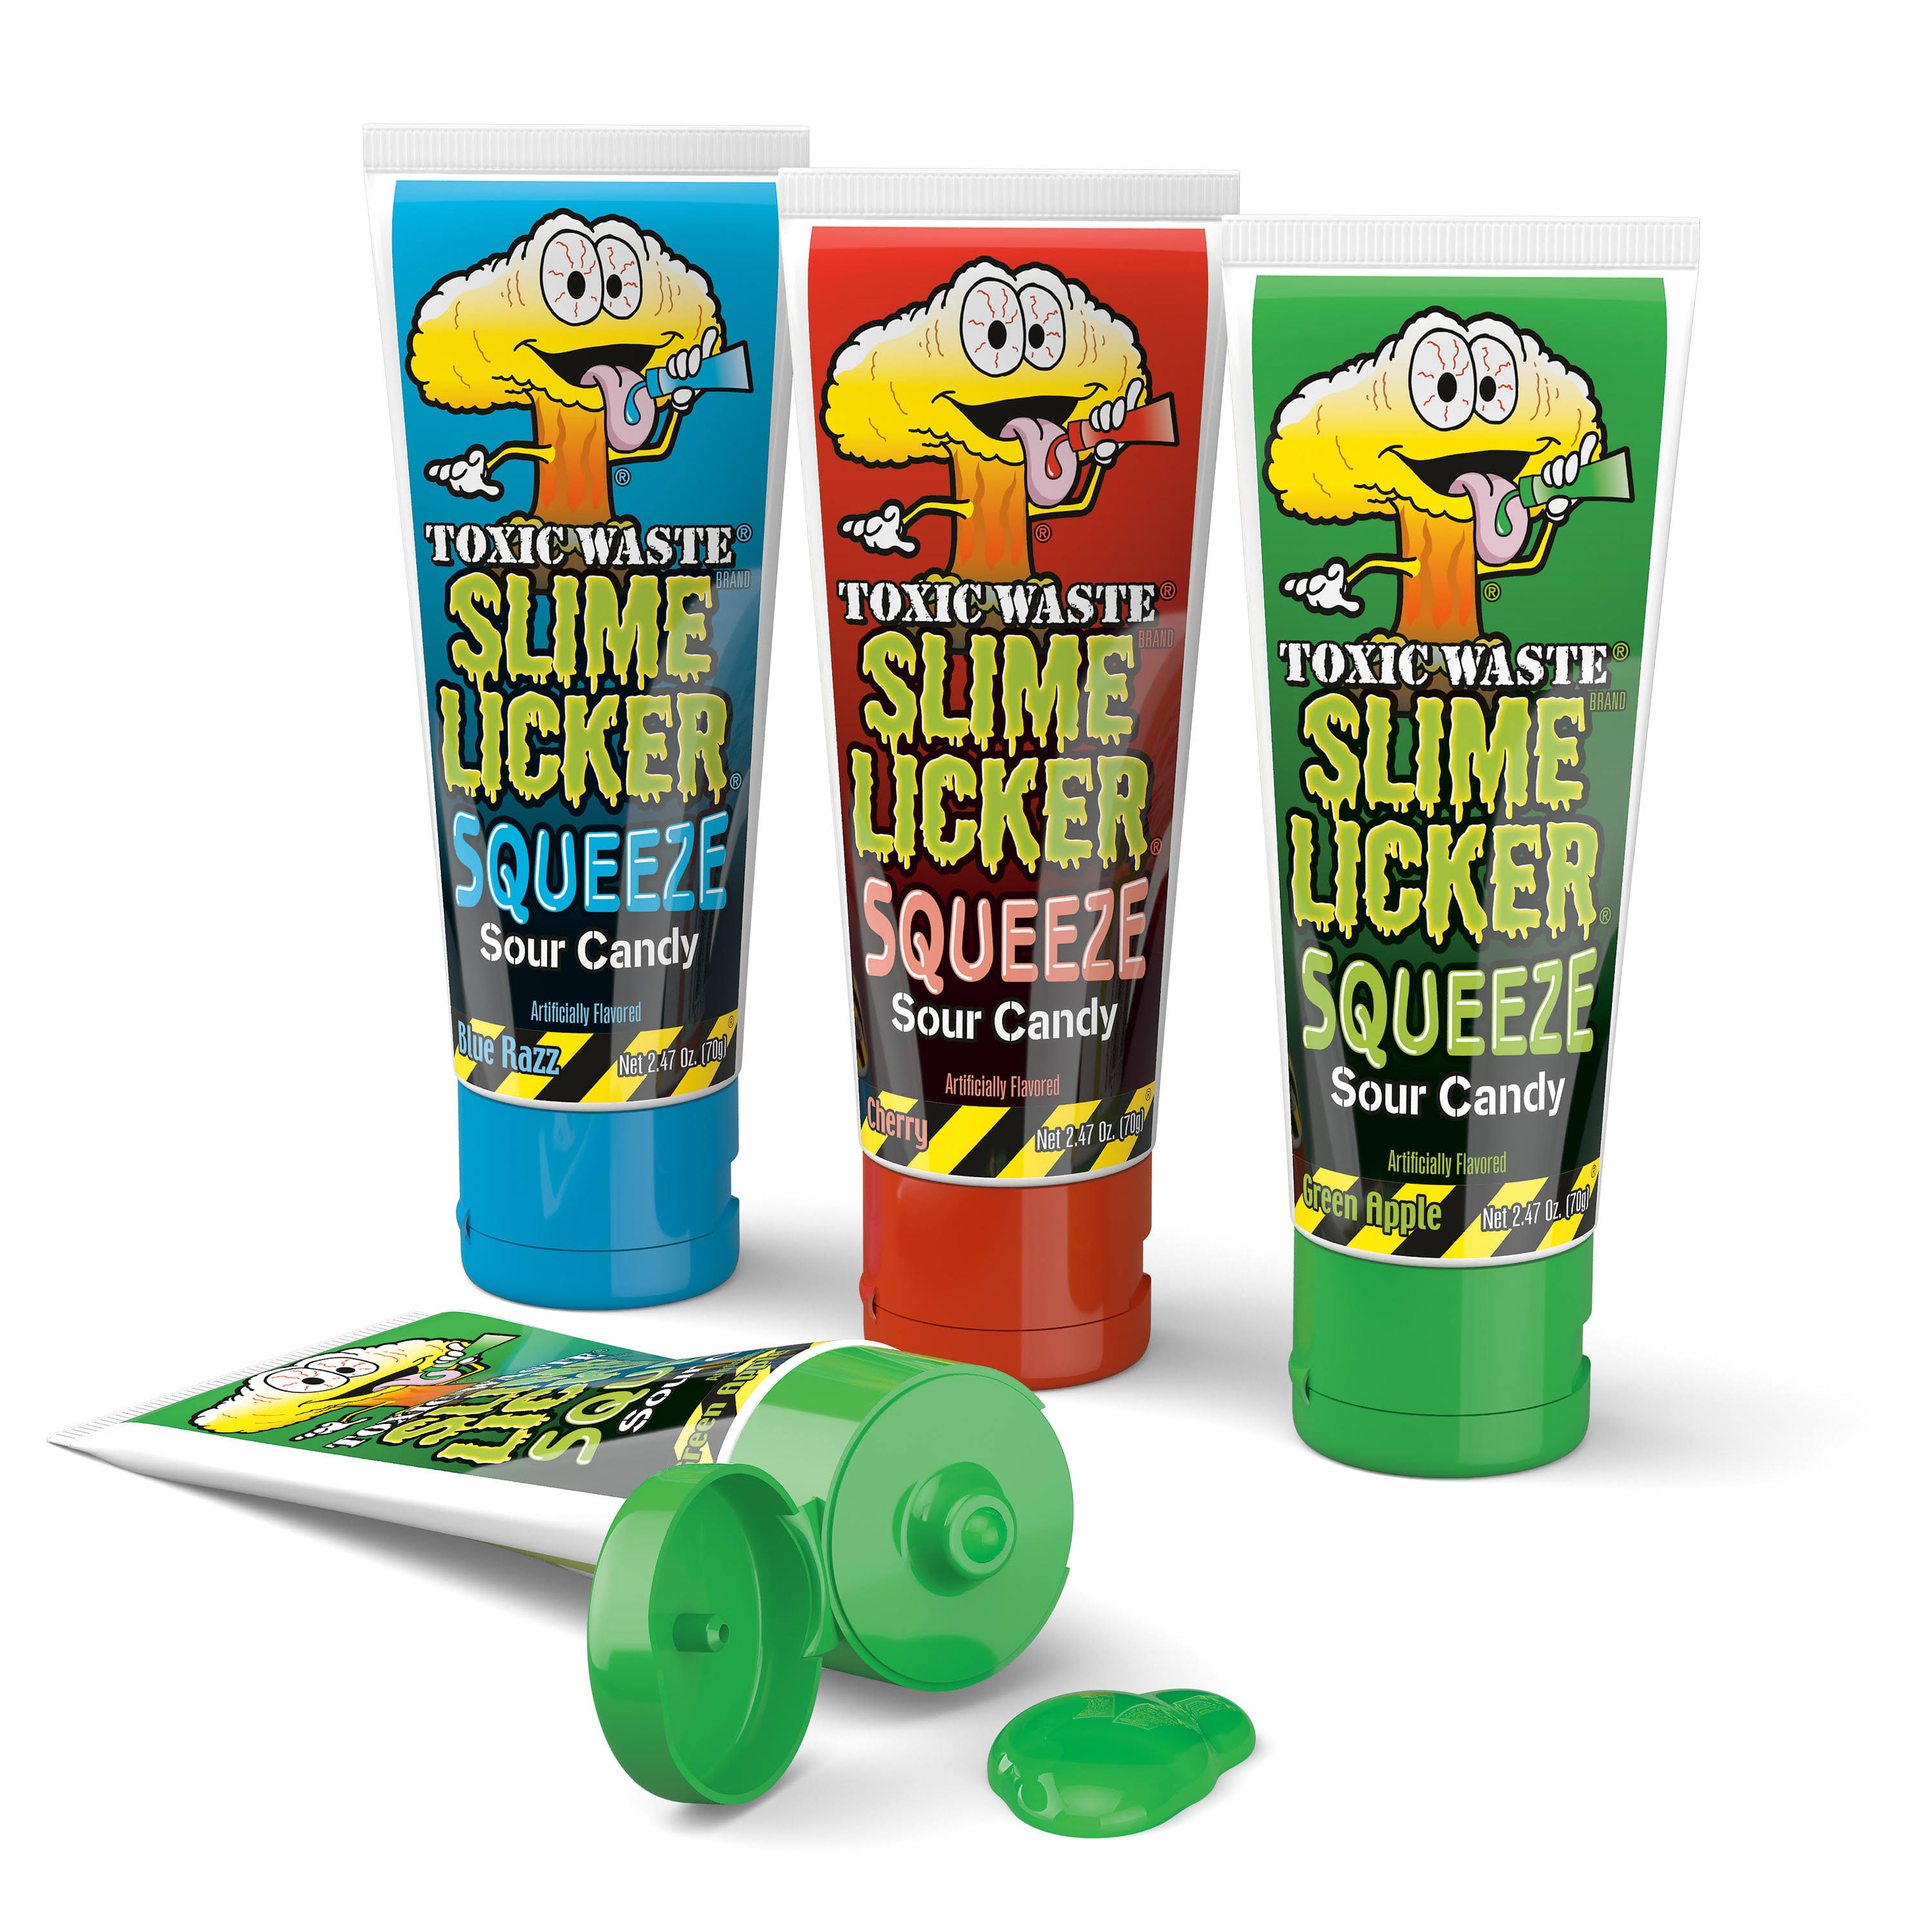 Toxic Waste Slime Licker Squeeze Sour Candy - 70ml